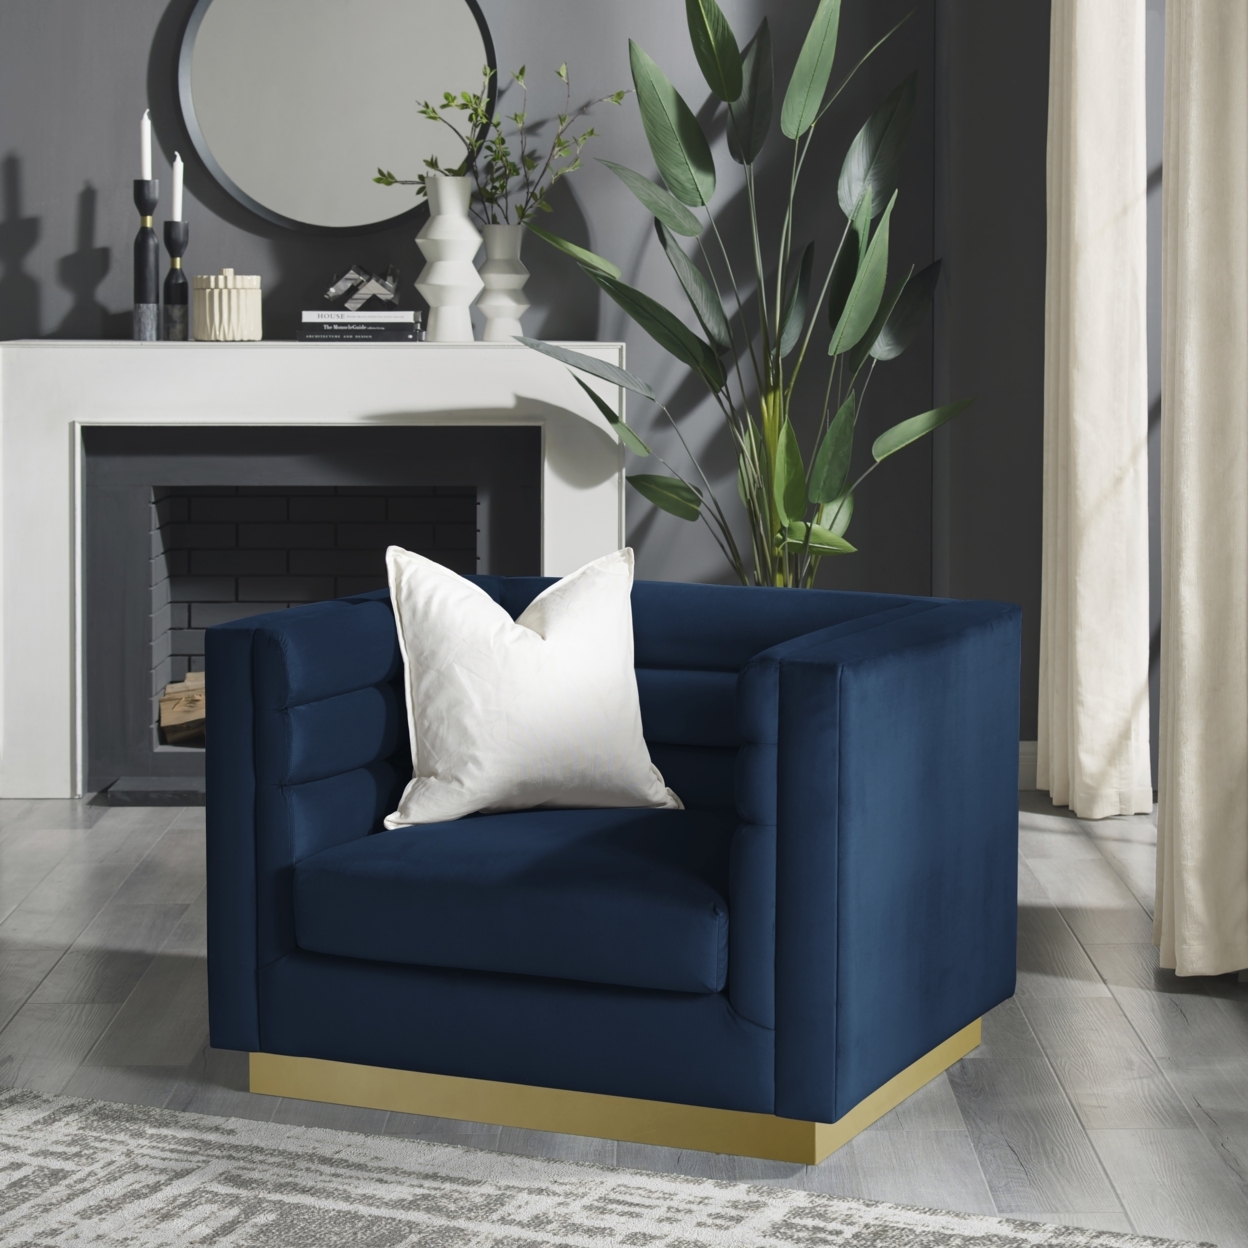 Aja Club Chair-Upholstered-Metal Base, Square Arms-Horizontal Channel Tufting - navy - navy blue